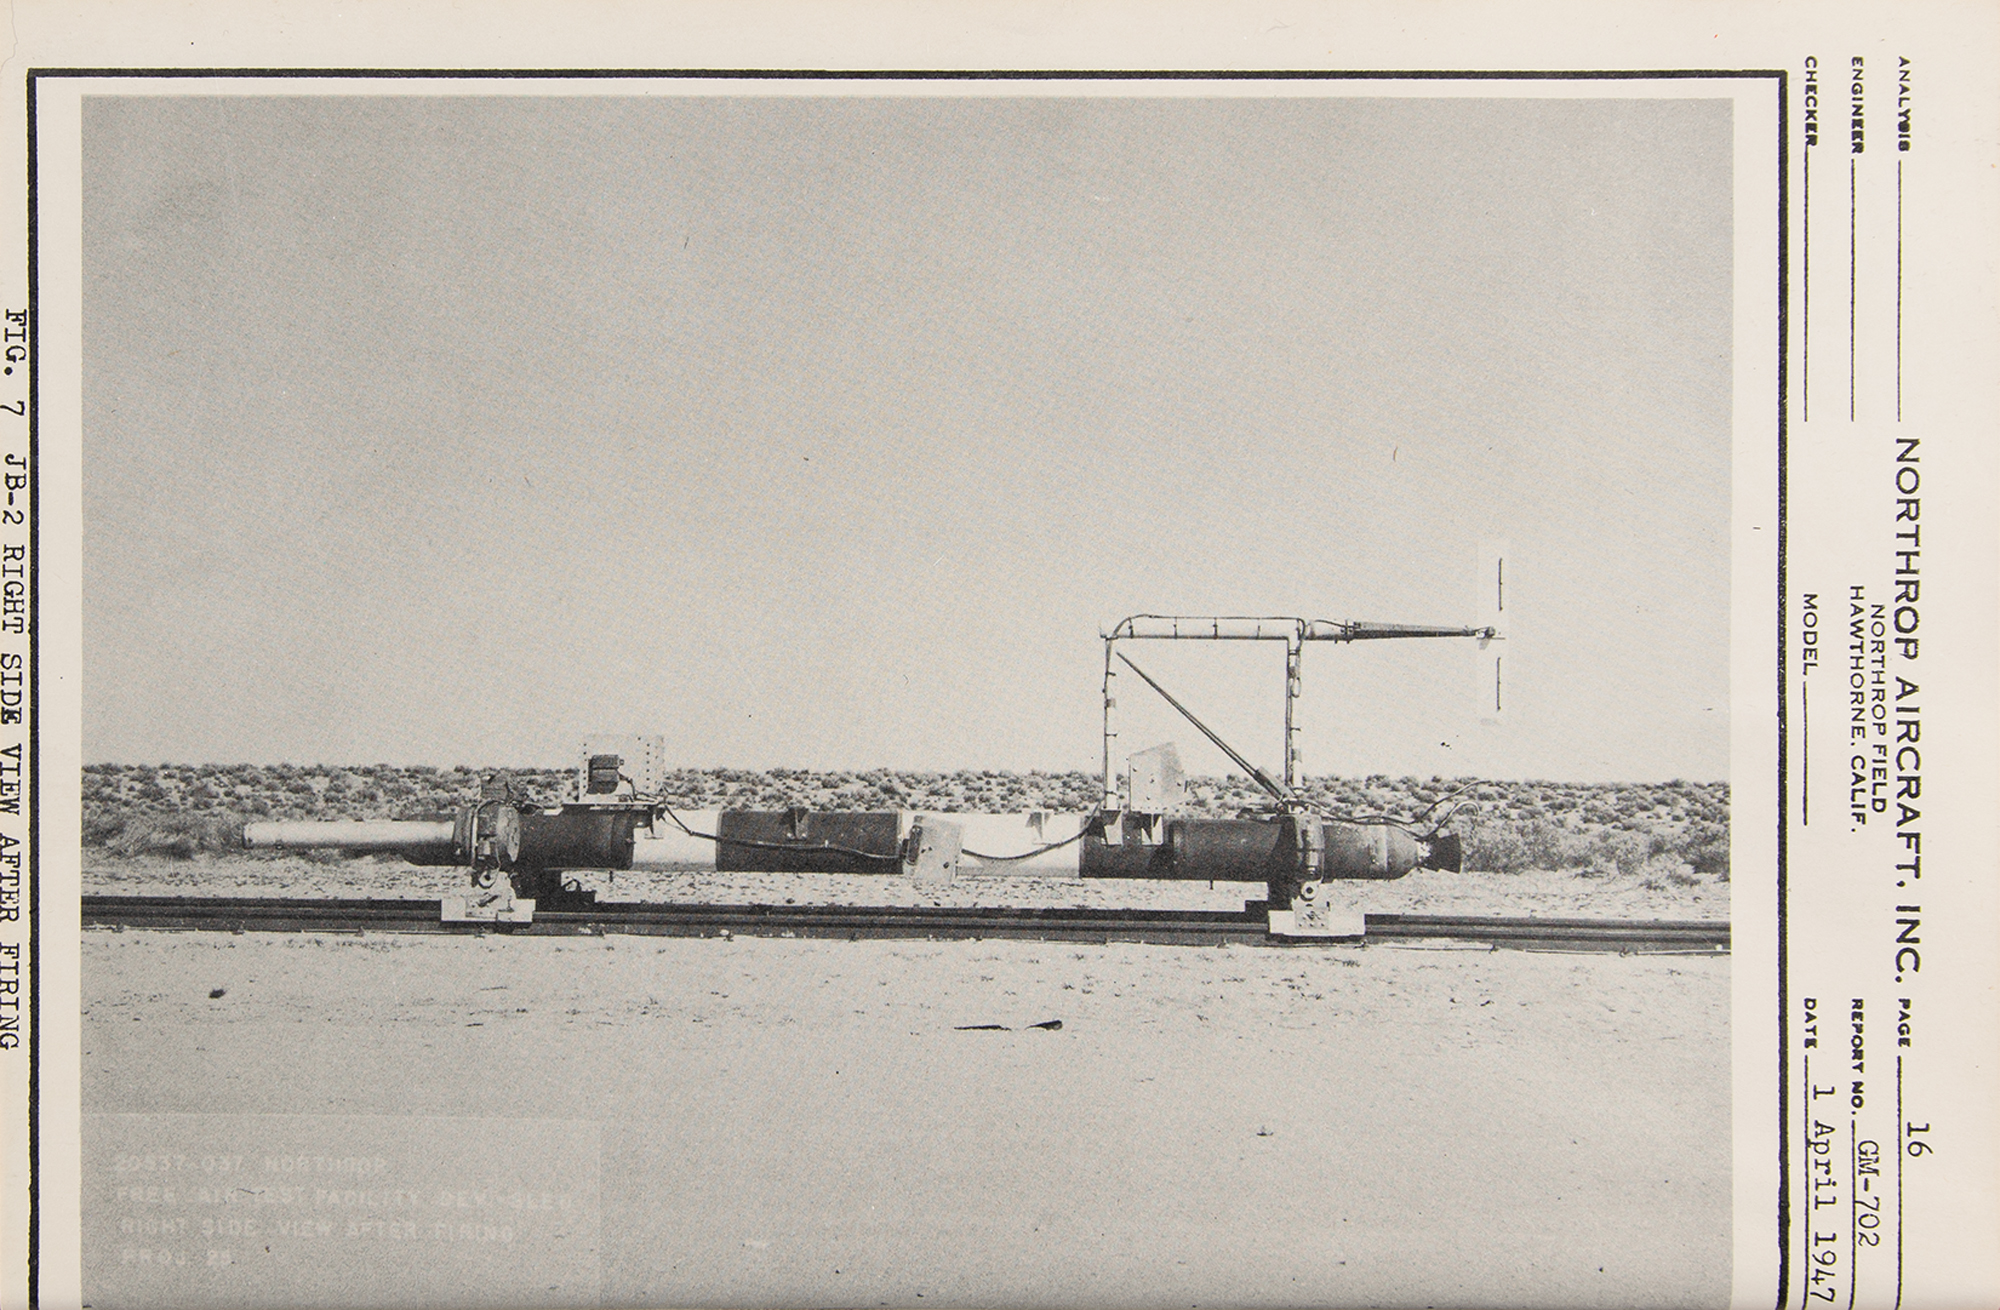 Lot #9036 Northrop Aircraft Free Air Test Facility Reports - Image 9